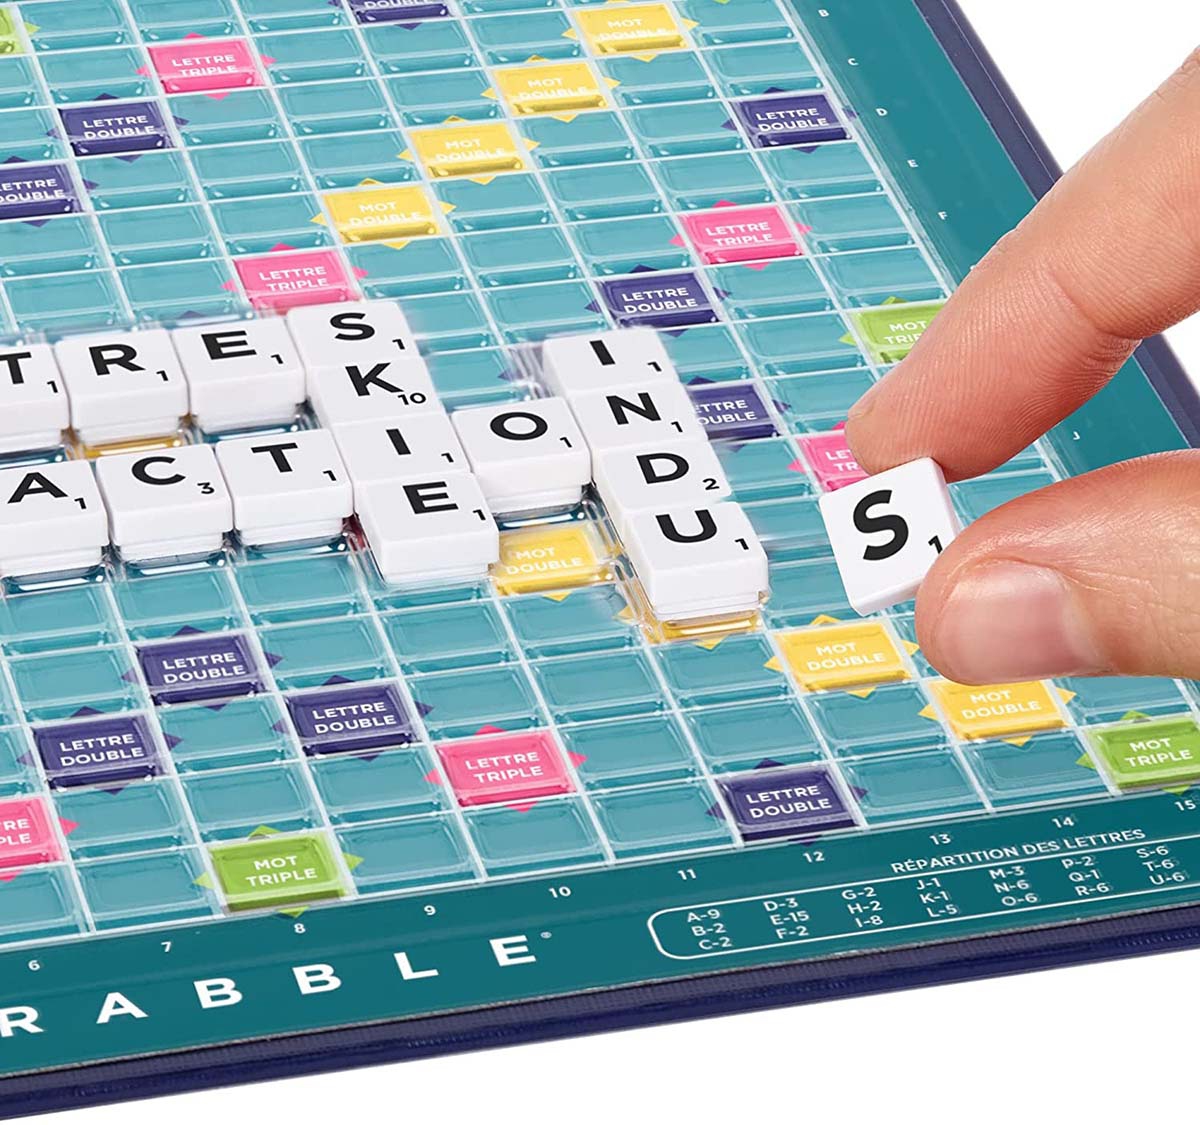 voyage meaning scrabble